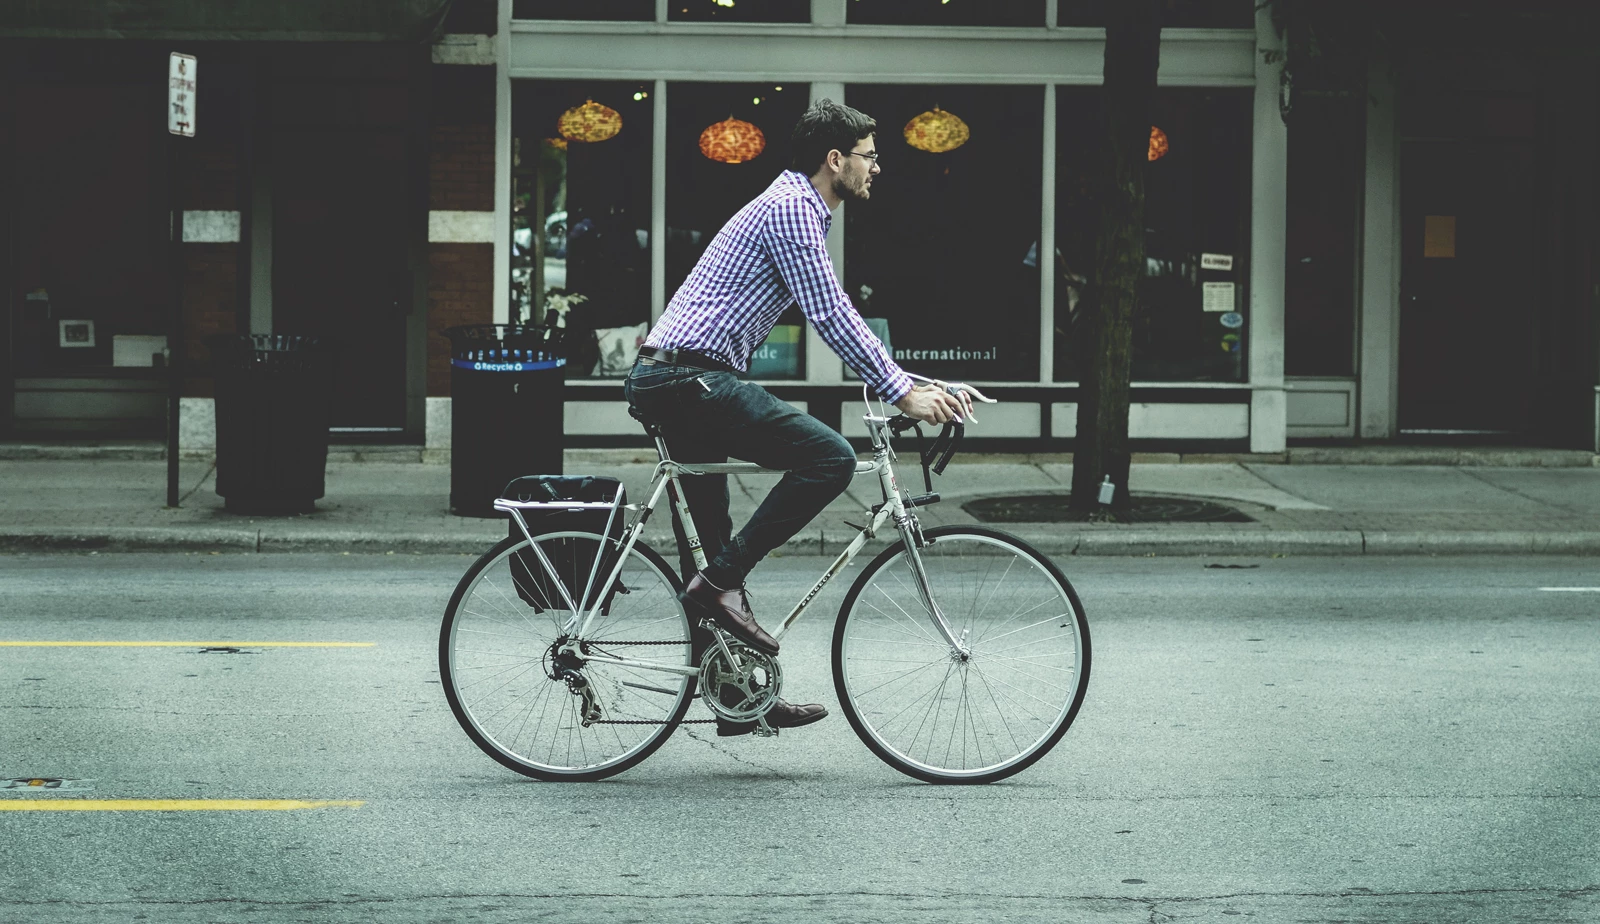 A commuter cycling to work on a busy city street